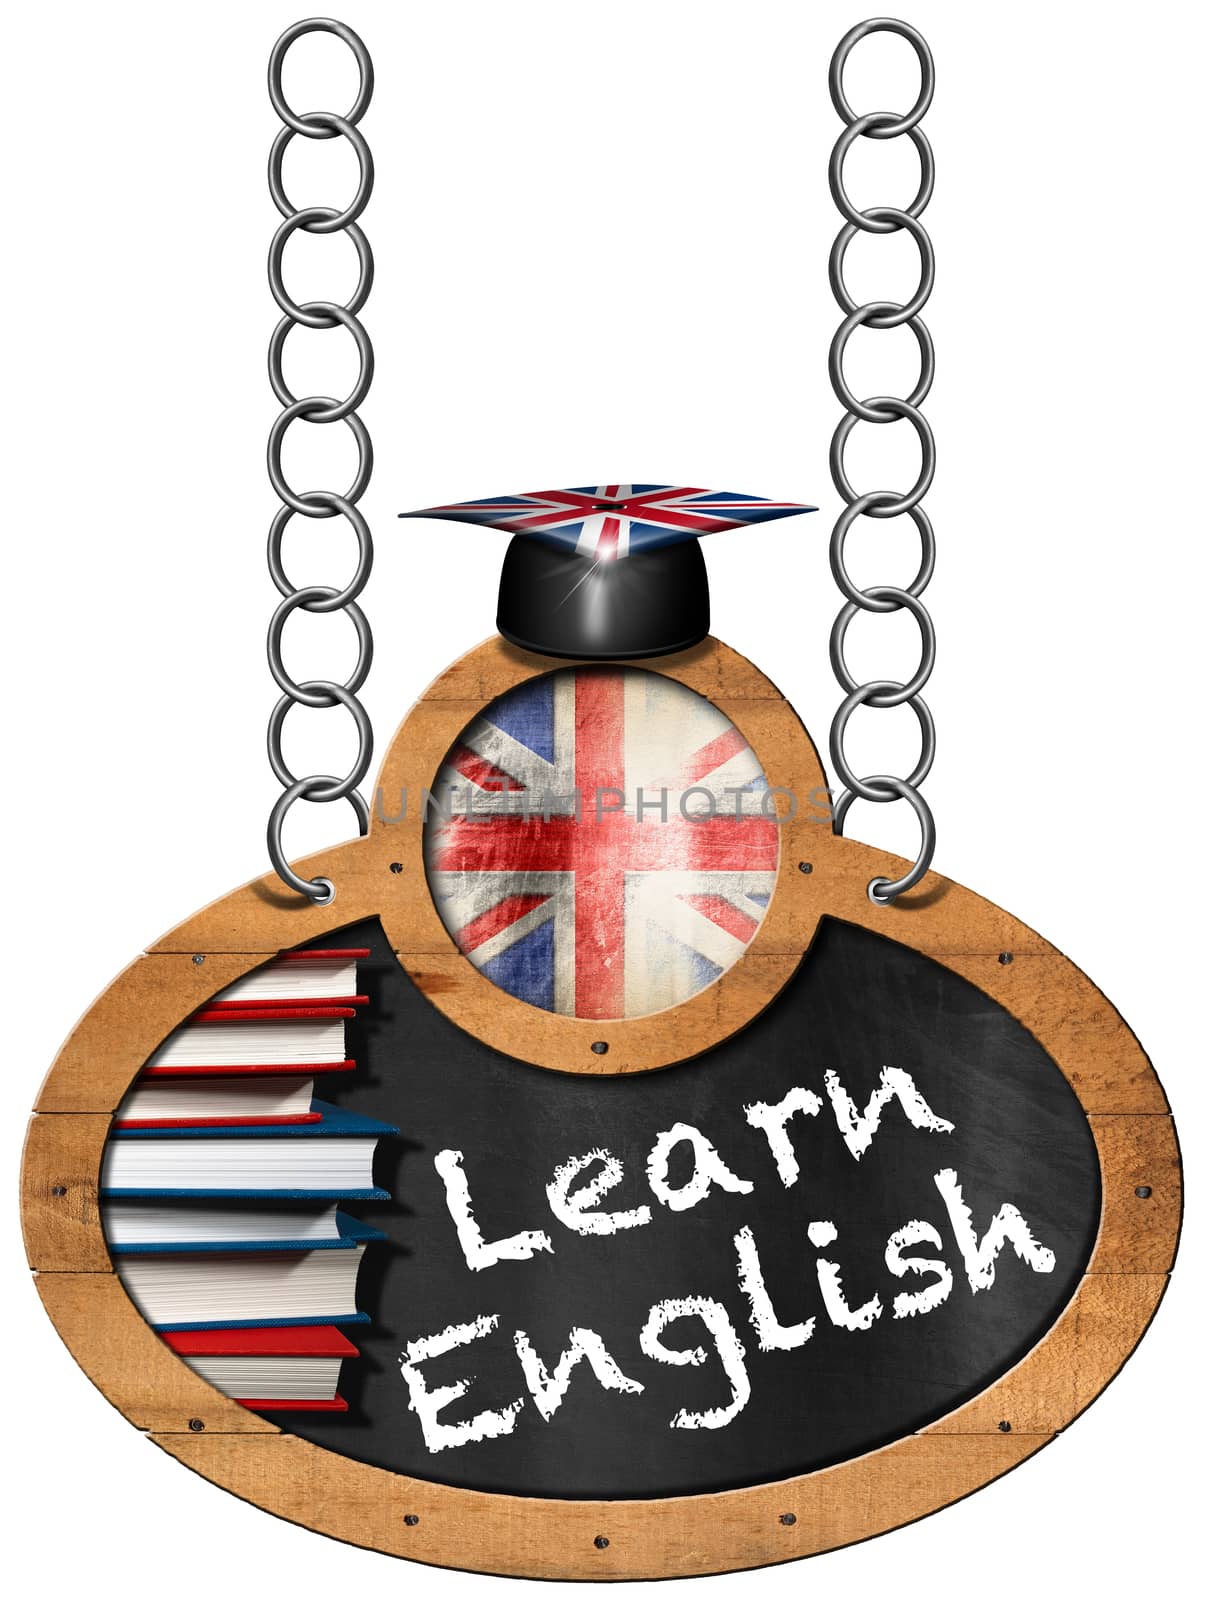 Learn English - Blackboard with Chain by catalby